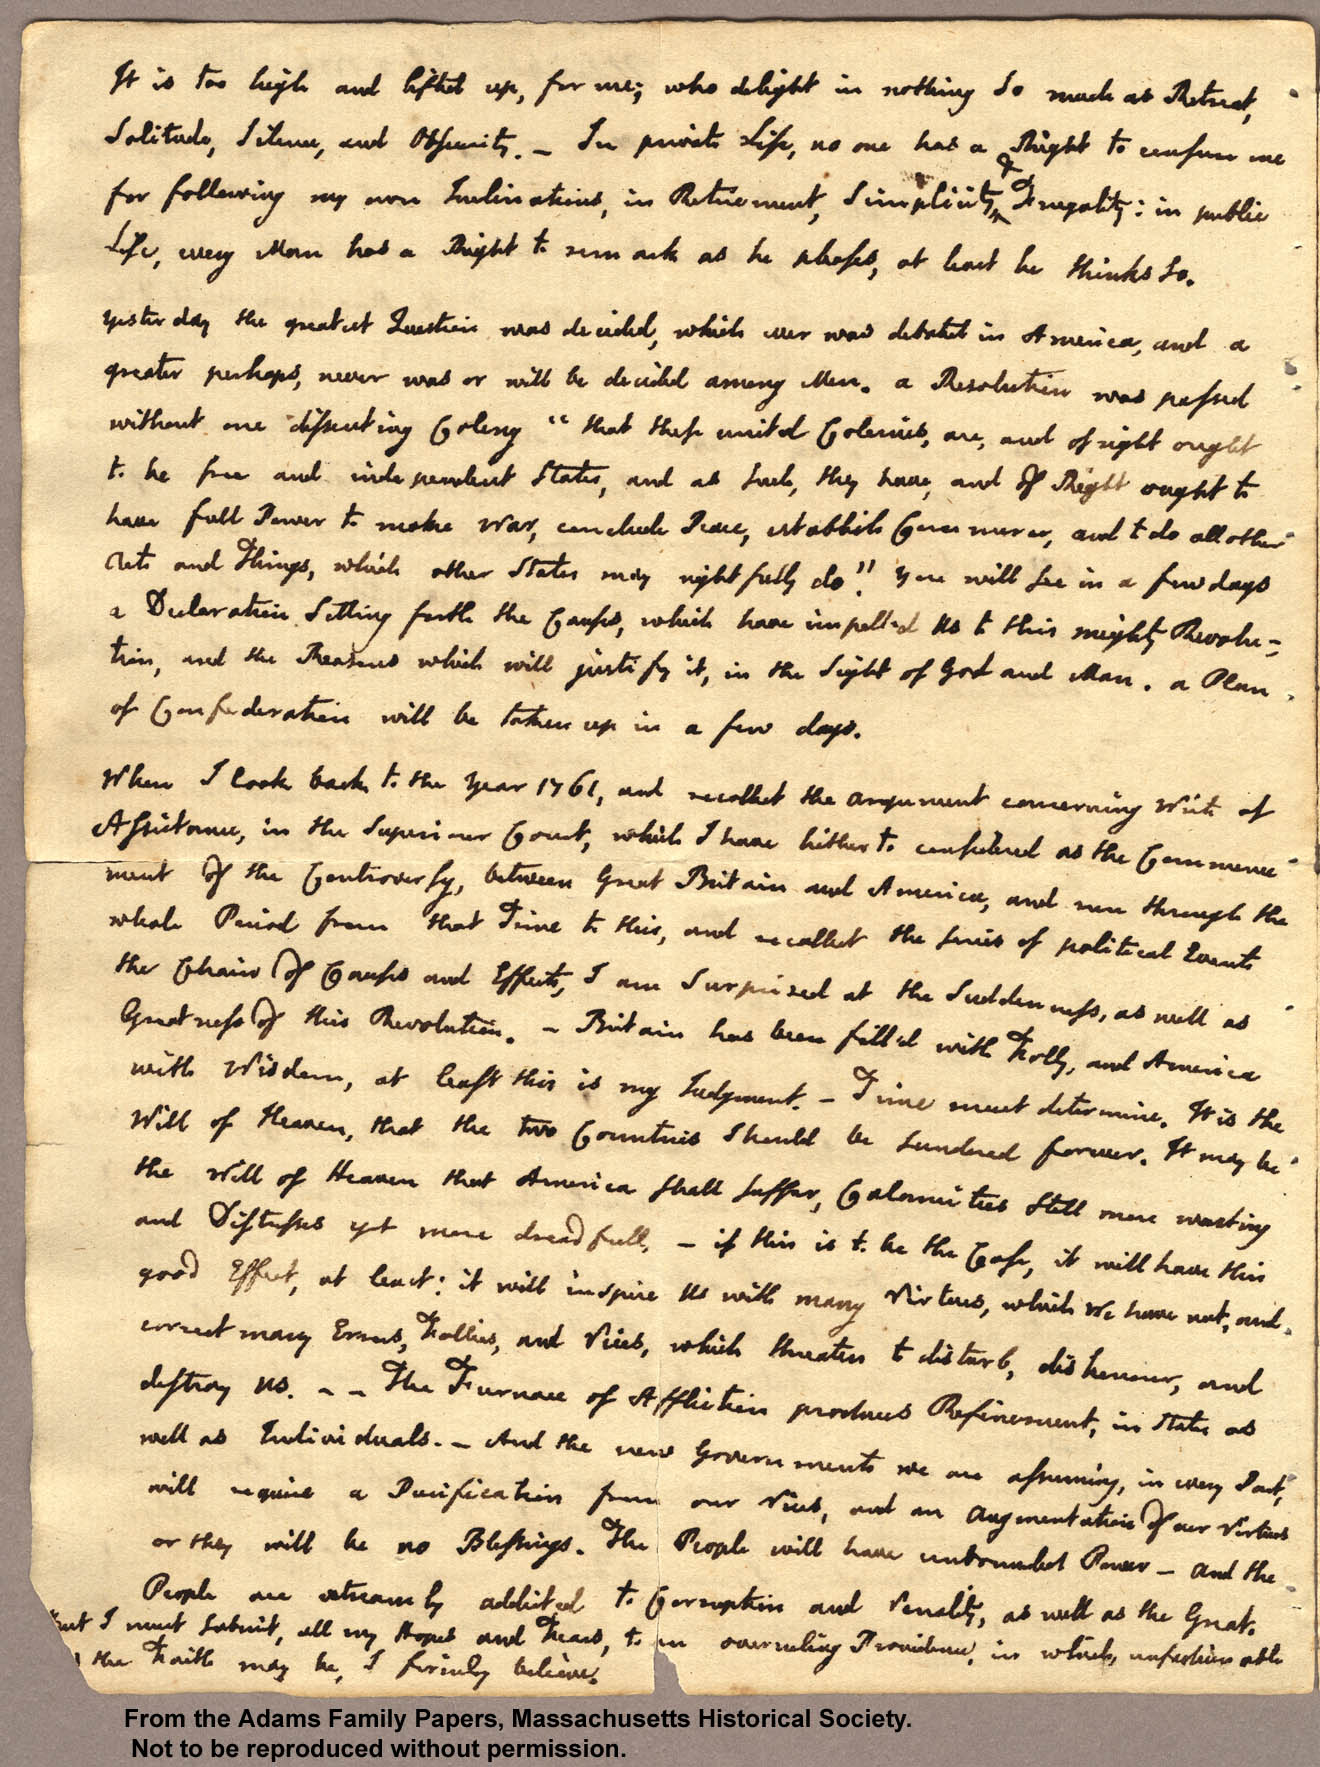 Image of the second page of a Letter from John Adams